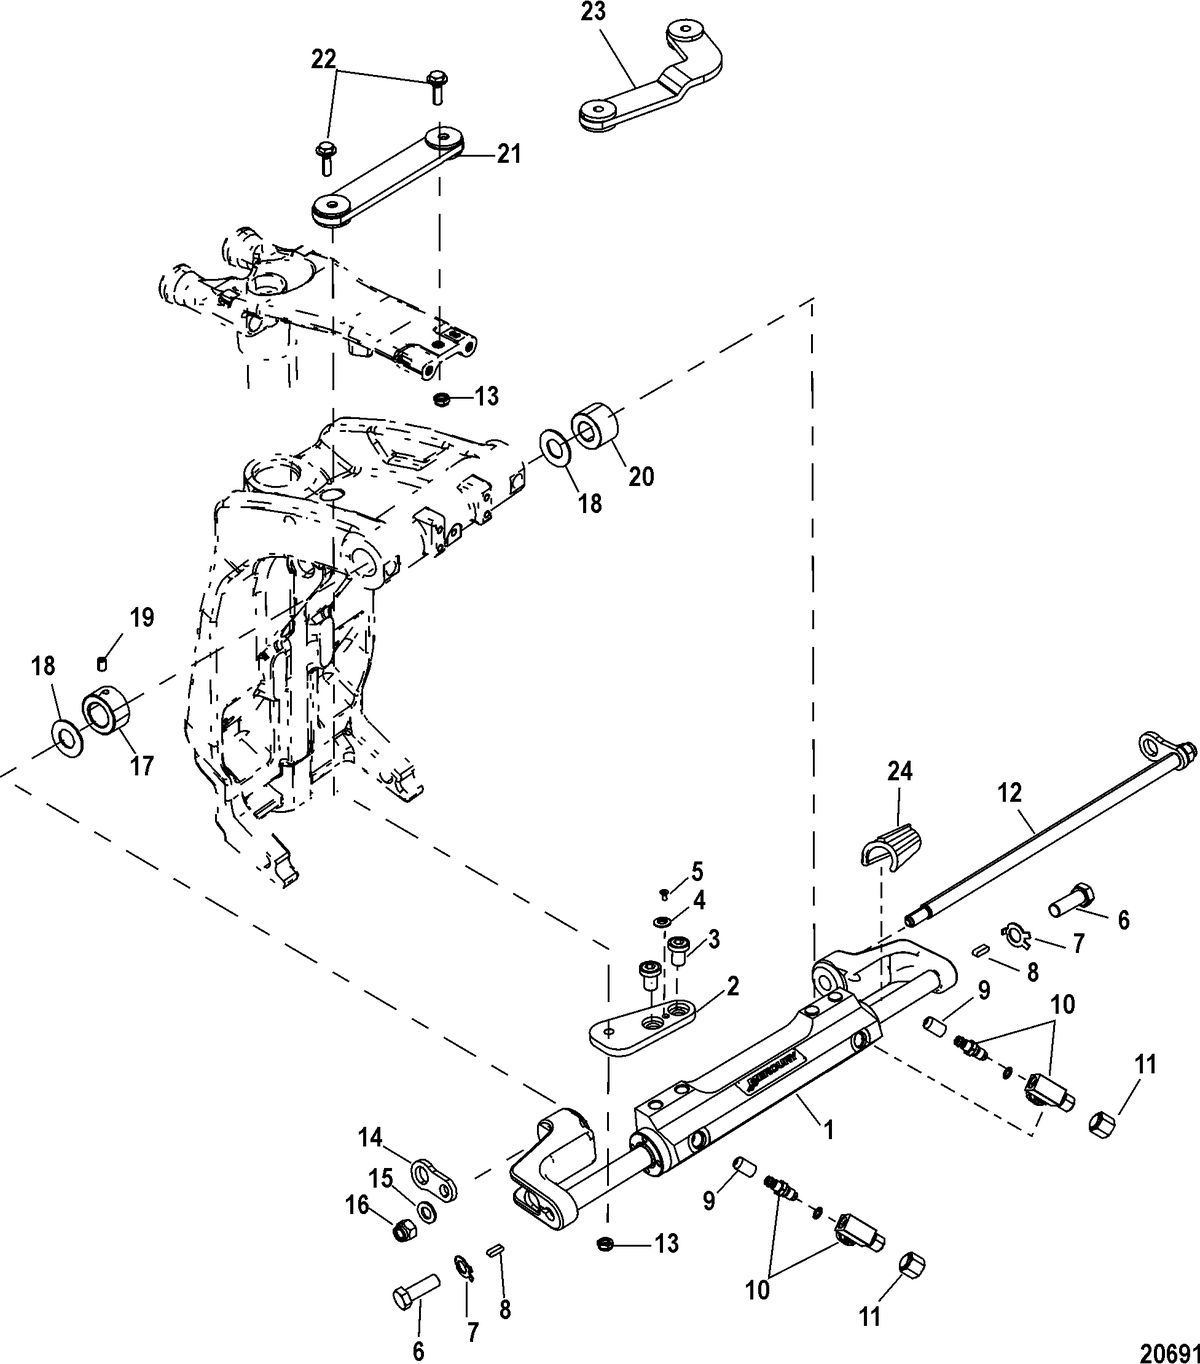 ACCESSORIES STEERING SYSTEMS AND COMPONENTS Steering Actuator Assembly(898349A01)